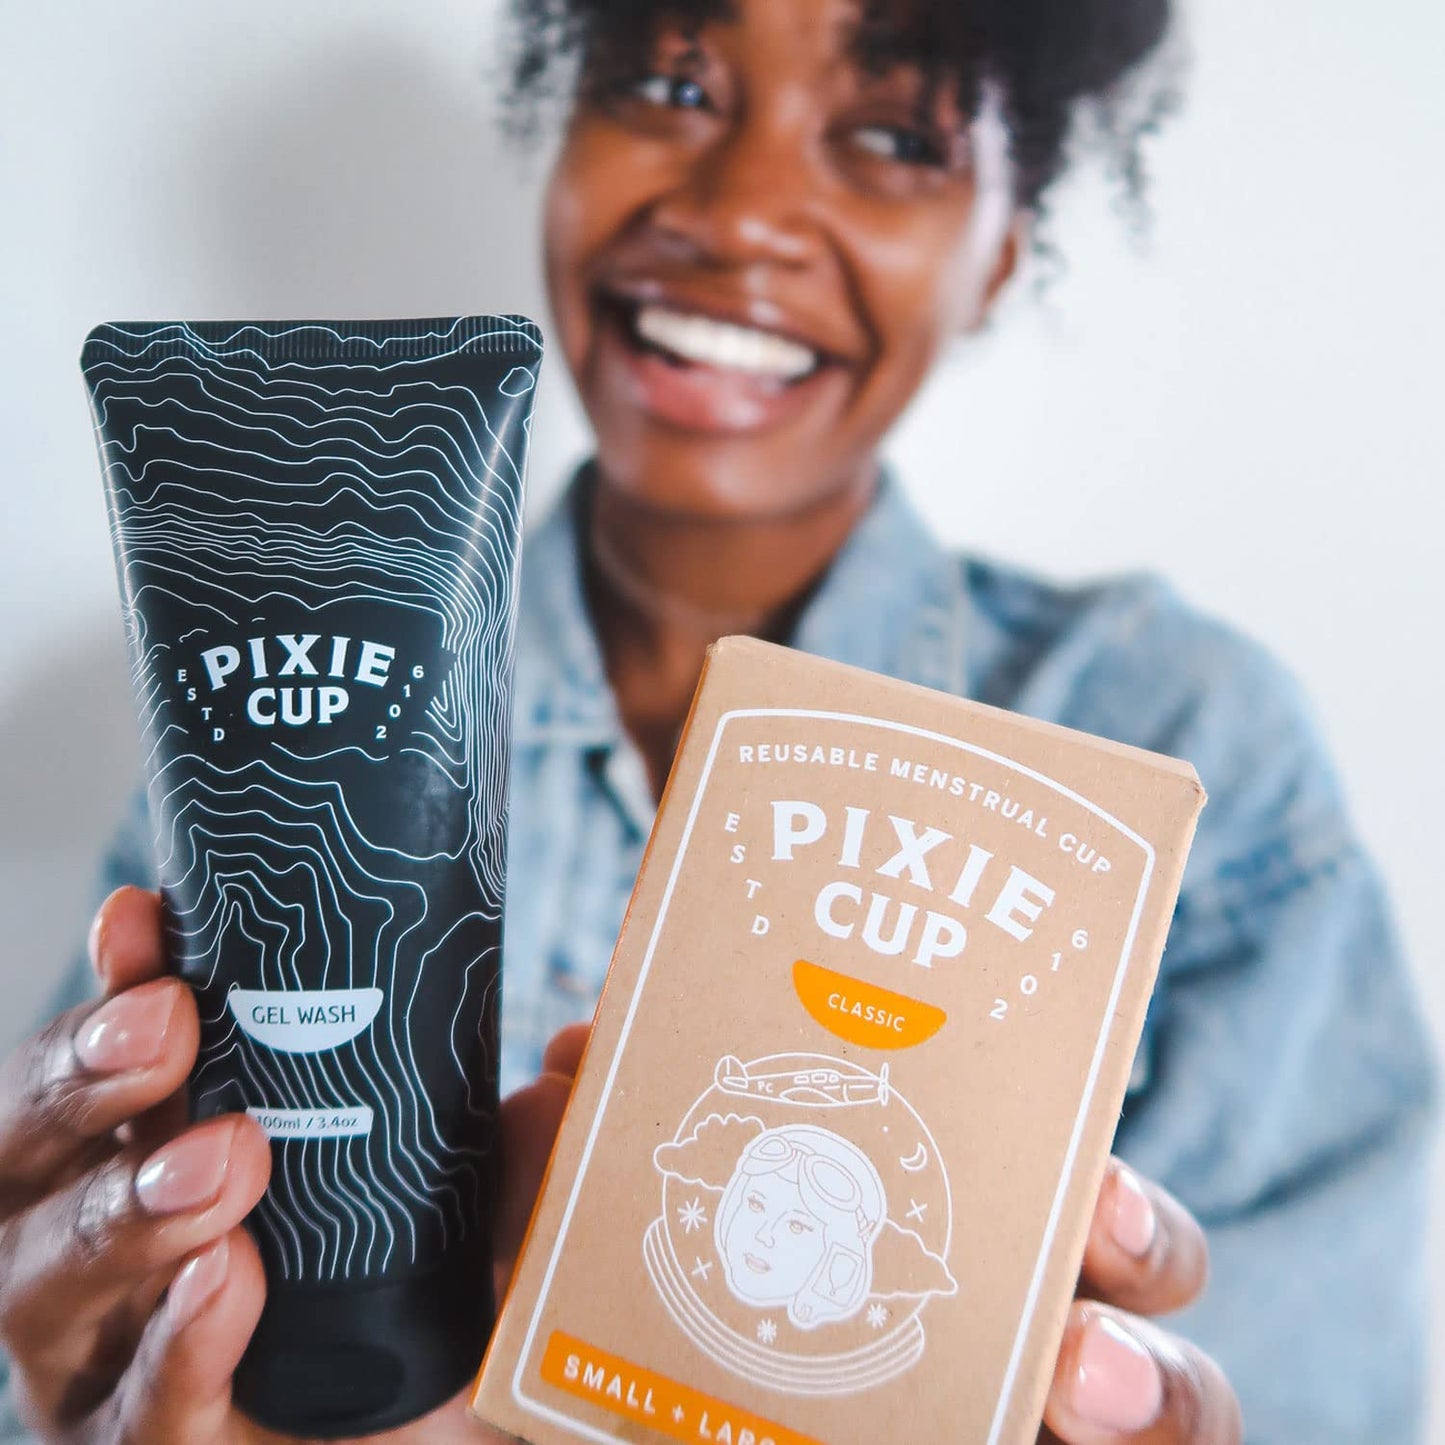 New Menstrual Cup Wash - Best Formula to Wash Your Period Cups - Organic and Natural Ingredients & pH Balanced - Travel Size - Gel Cleaner - Sterilizer Soap for Menstrual Discs (3.4 Ounces)